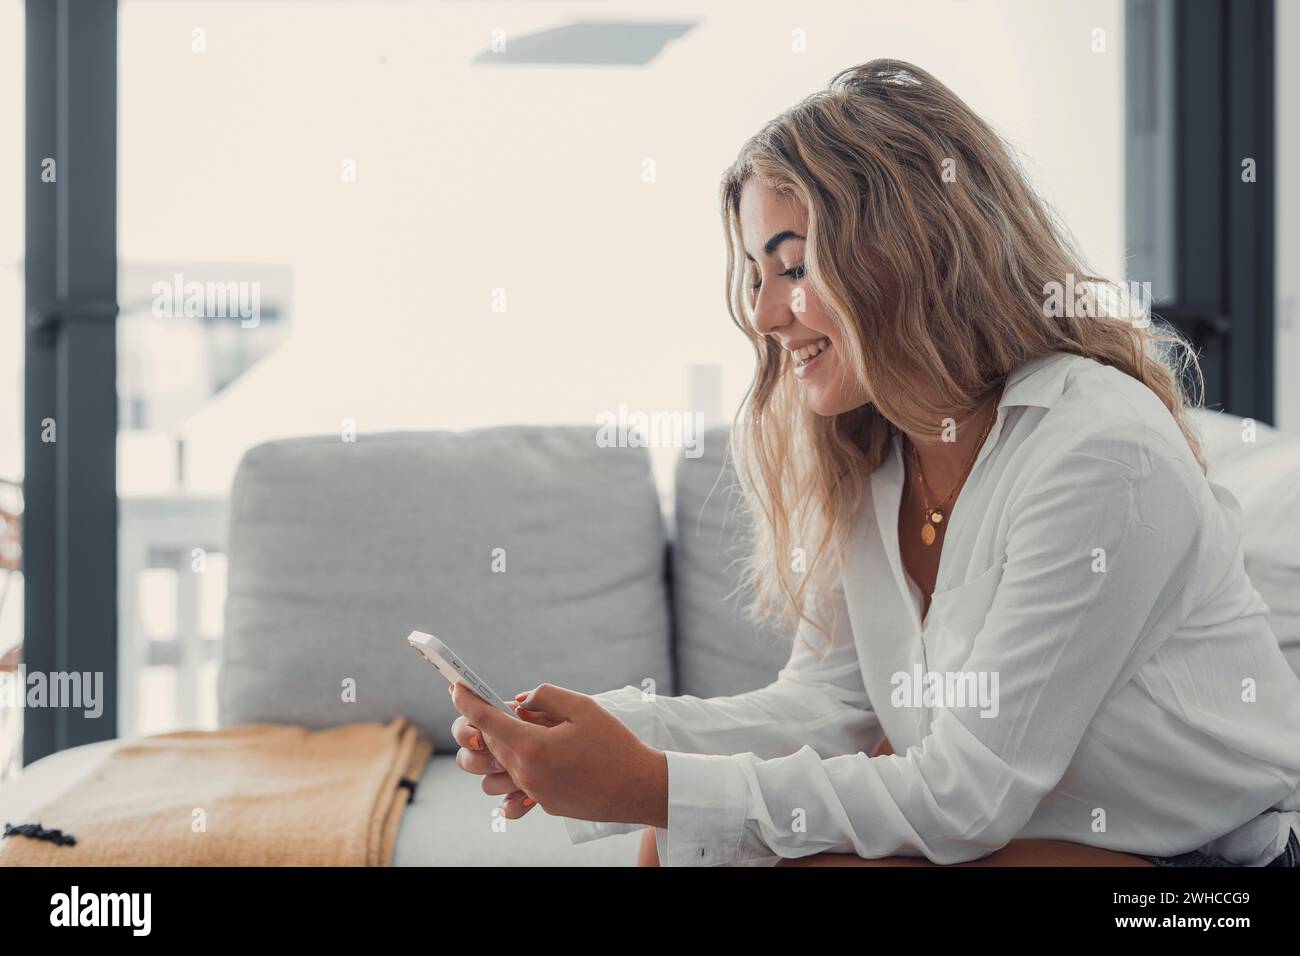 Portrait of one young attractive blonde woman using phone cell on couch relaxing surfing the net at home. Relaxing online concept lifestyle Stock Photo